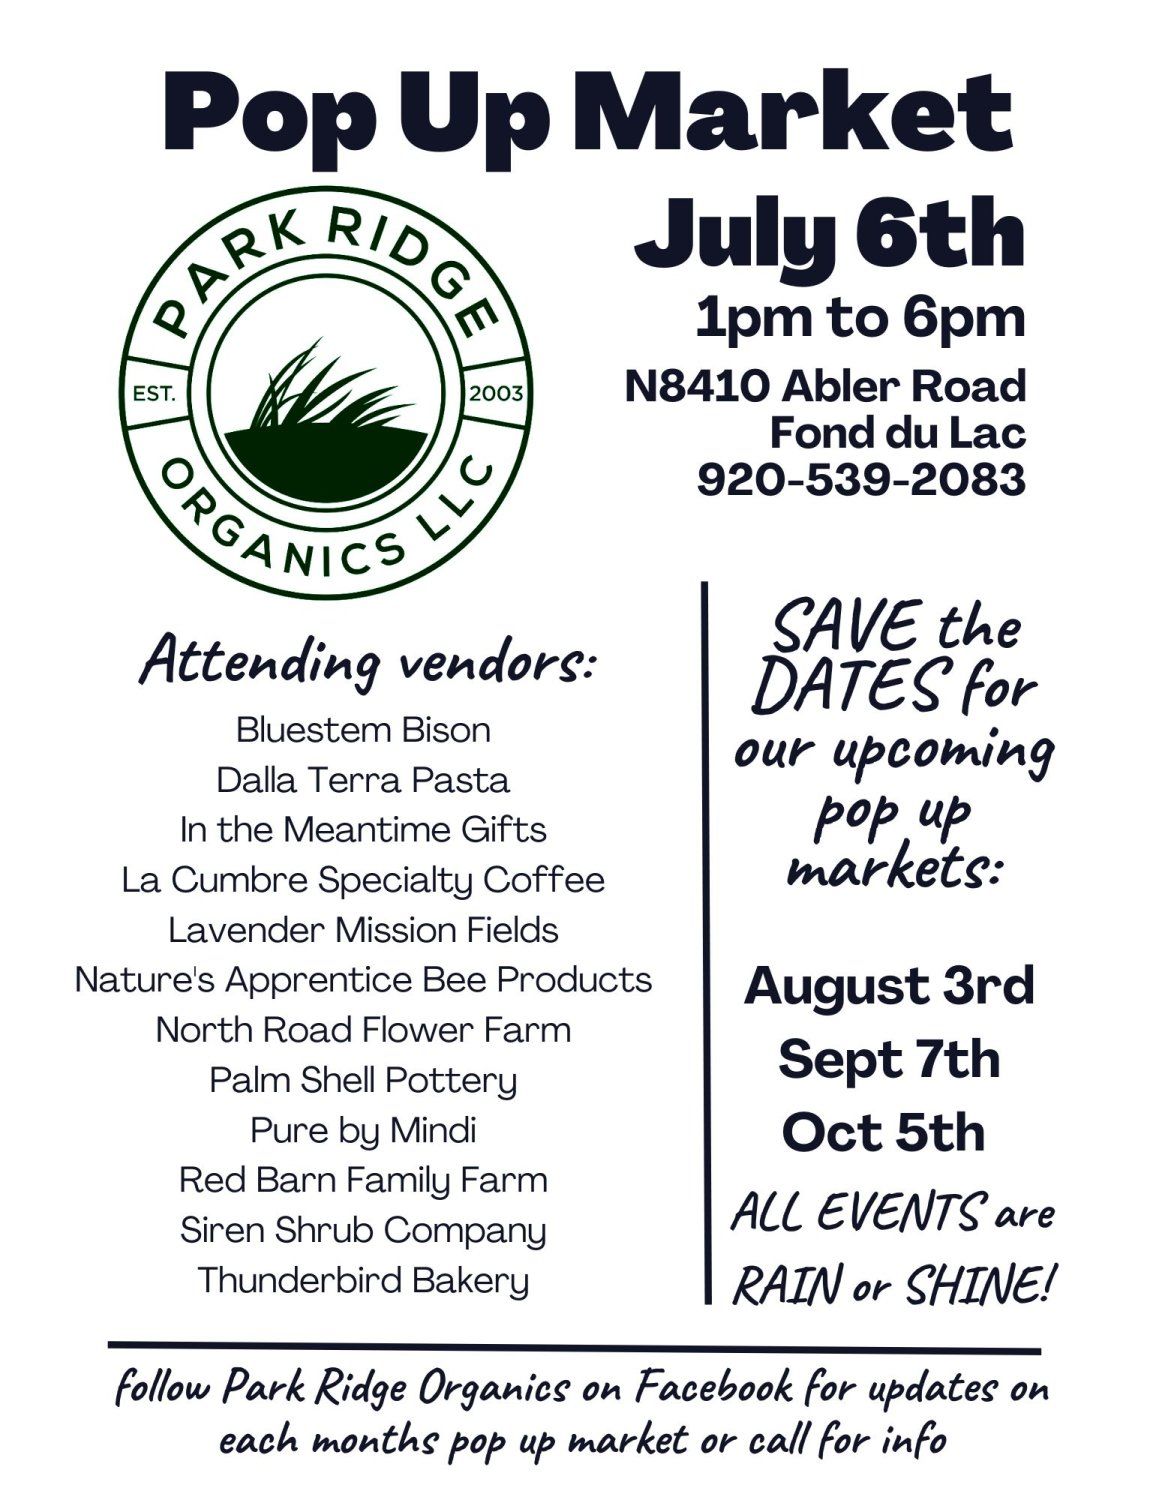 Previous Happening: Pop Up Market July 6th at the Farm